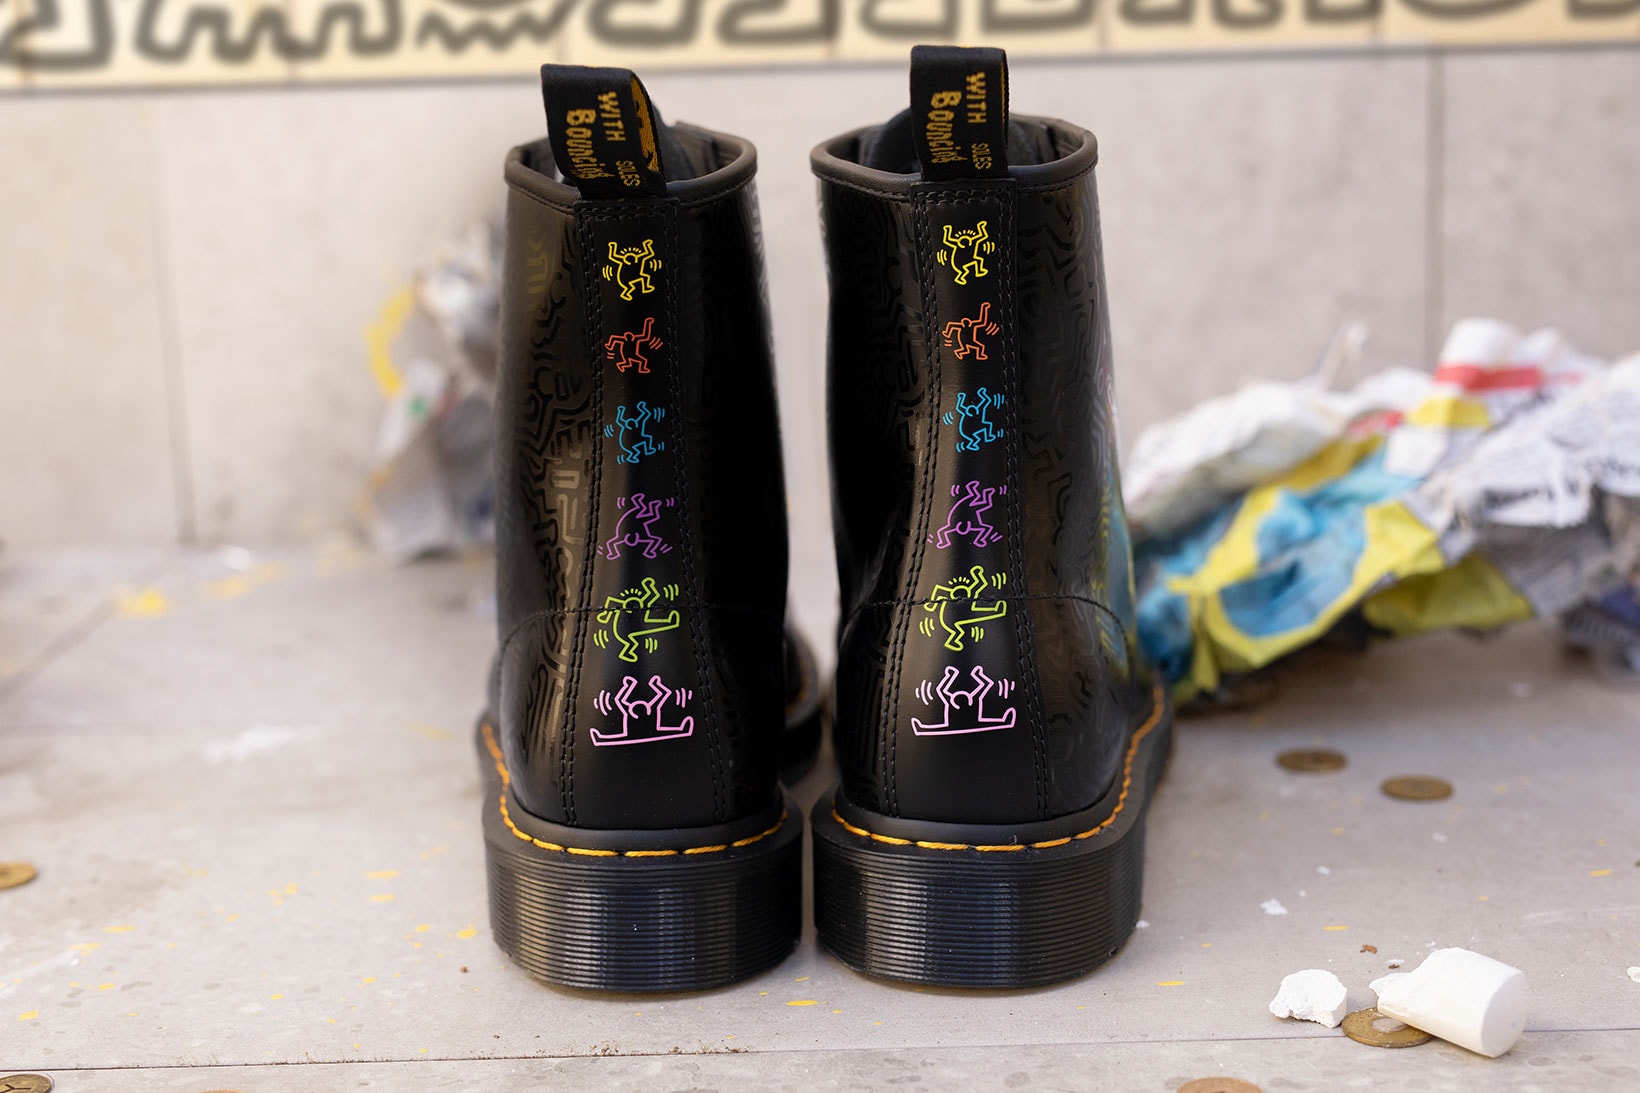 Dr. Martens Keith Haring Collaboration Boots Shoes 1460 Black Patterns Illustrations Art Heel Color